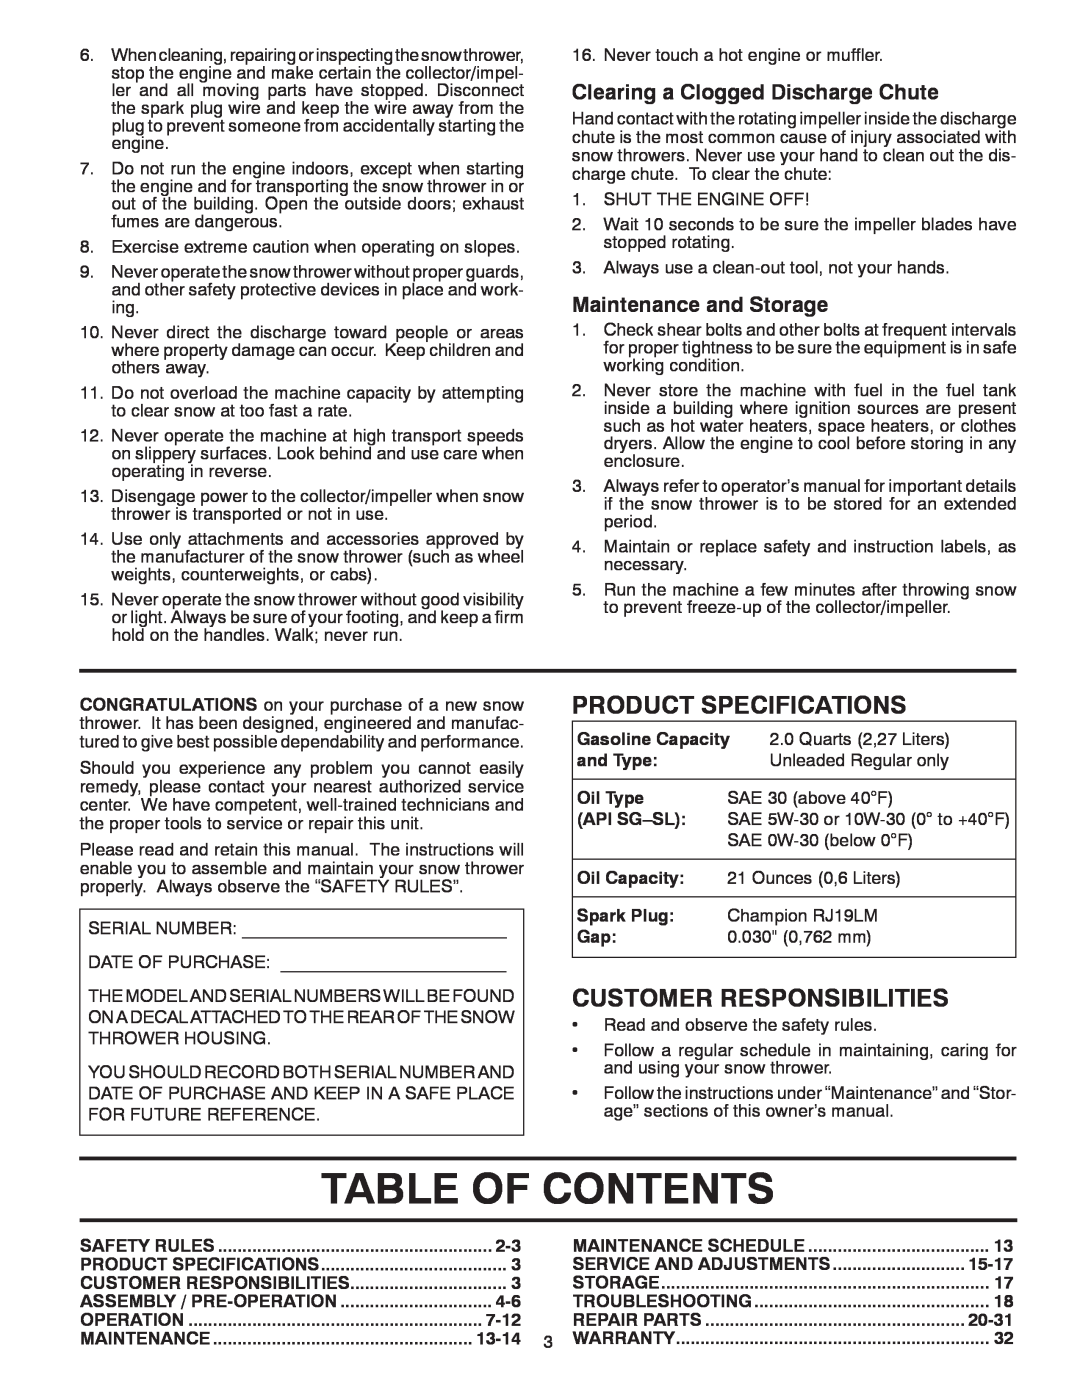 Poulan 415136 Table Of Contents, Product Specifications, Customer Responsibilities, Clearing a Clogged Discharge Chute 